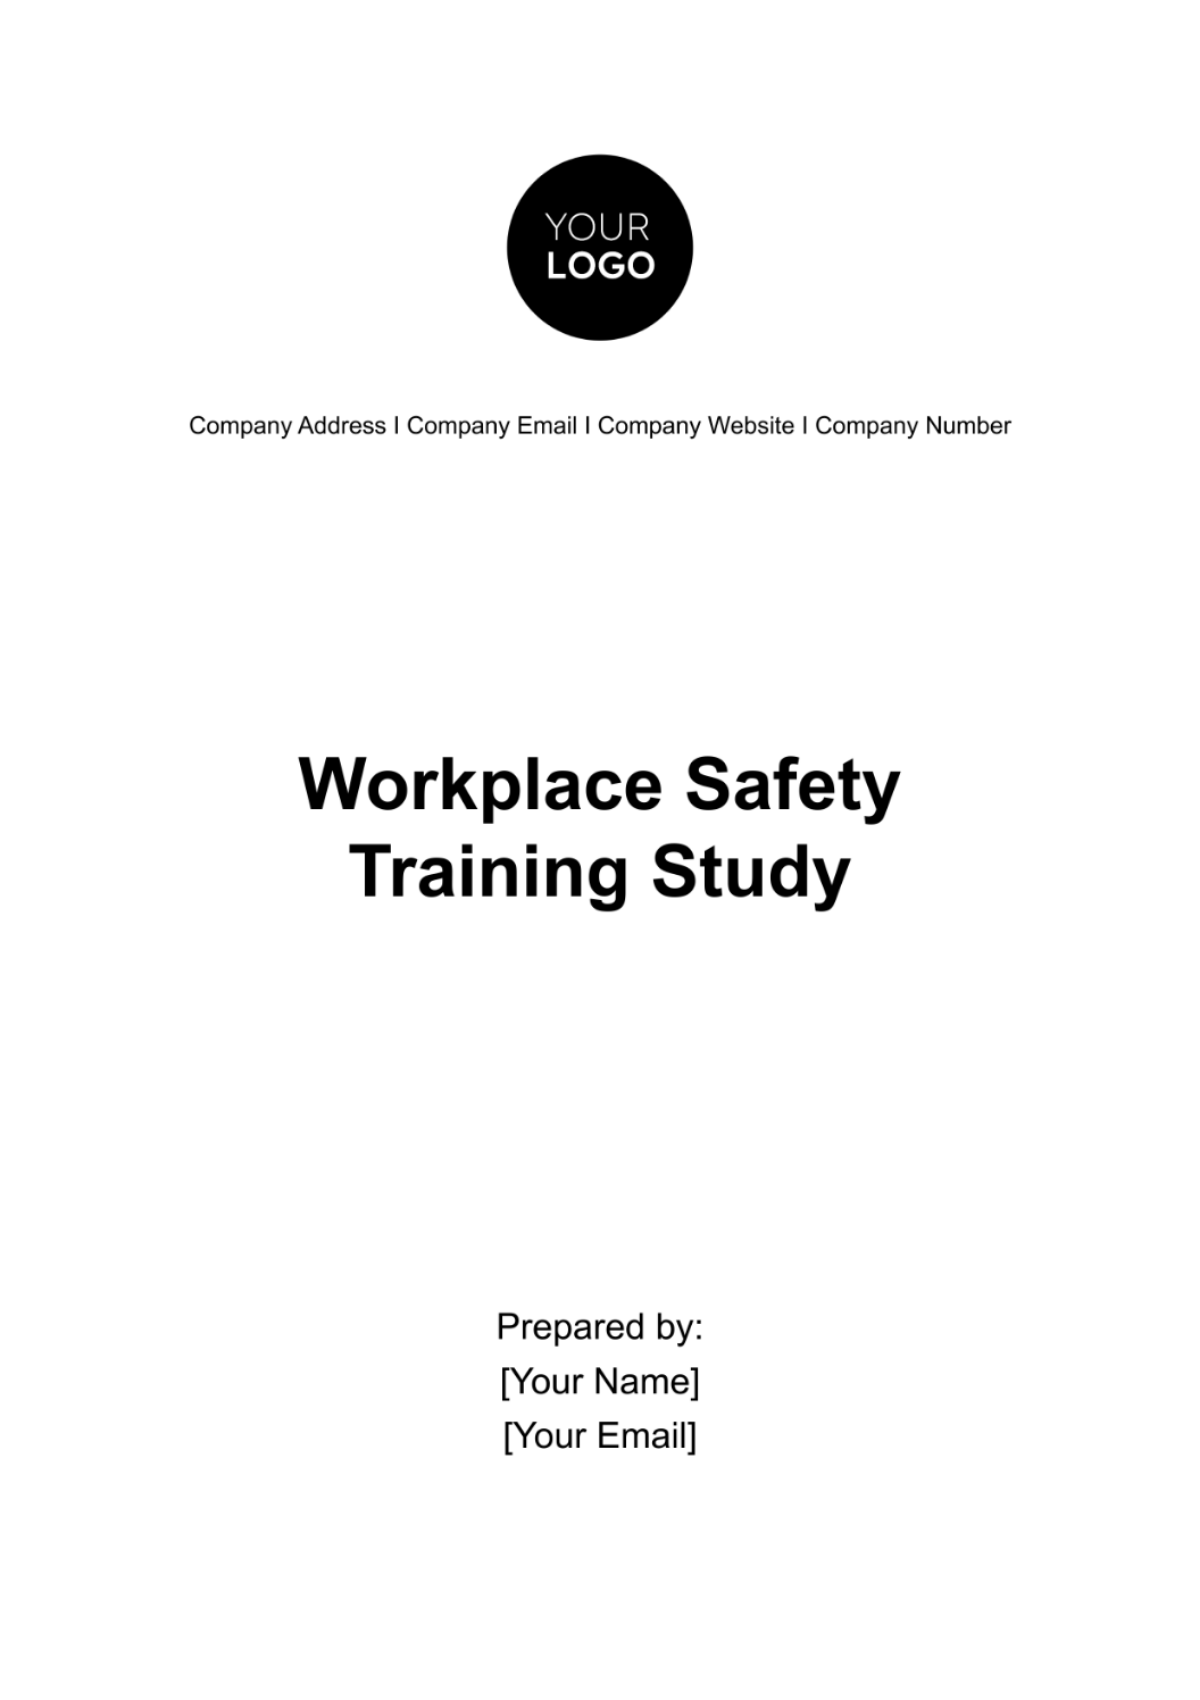 Free Workplace Safety Training Study Template